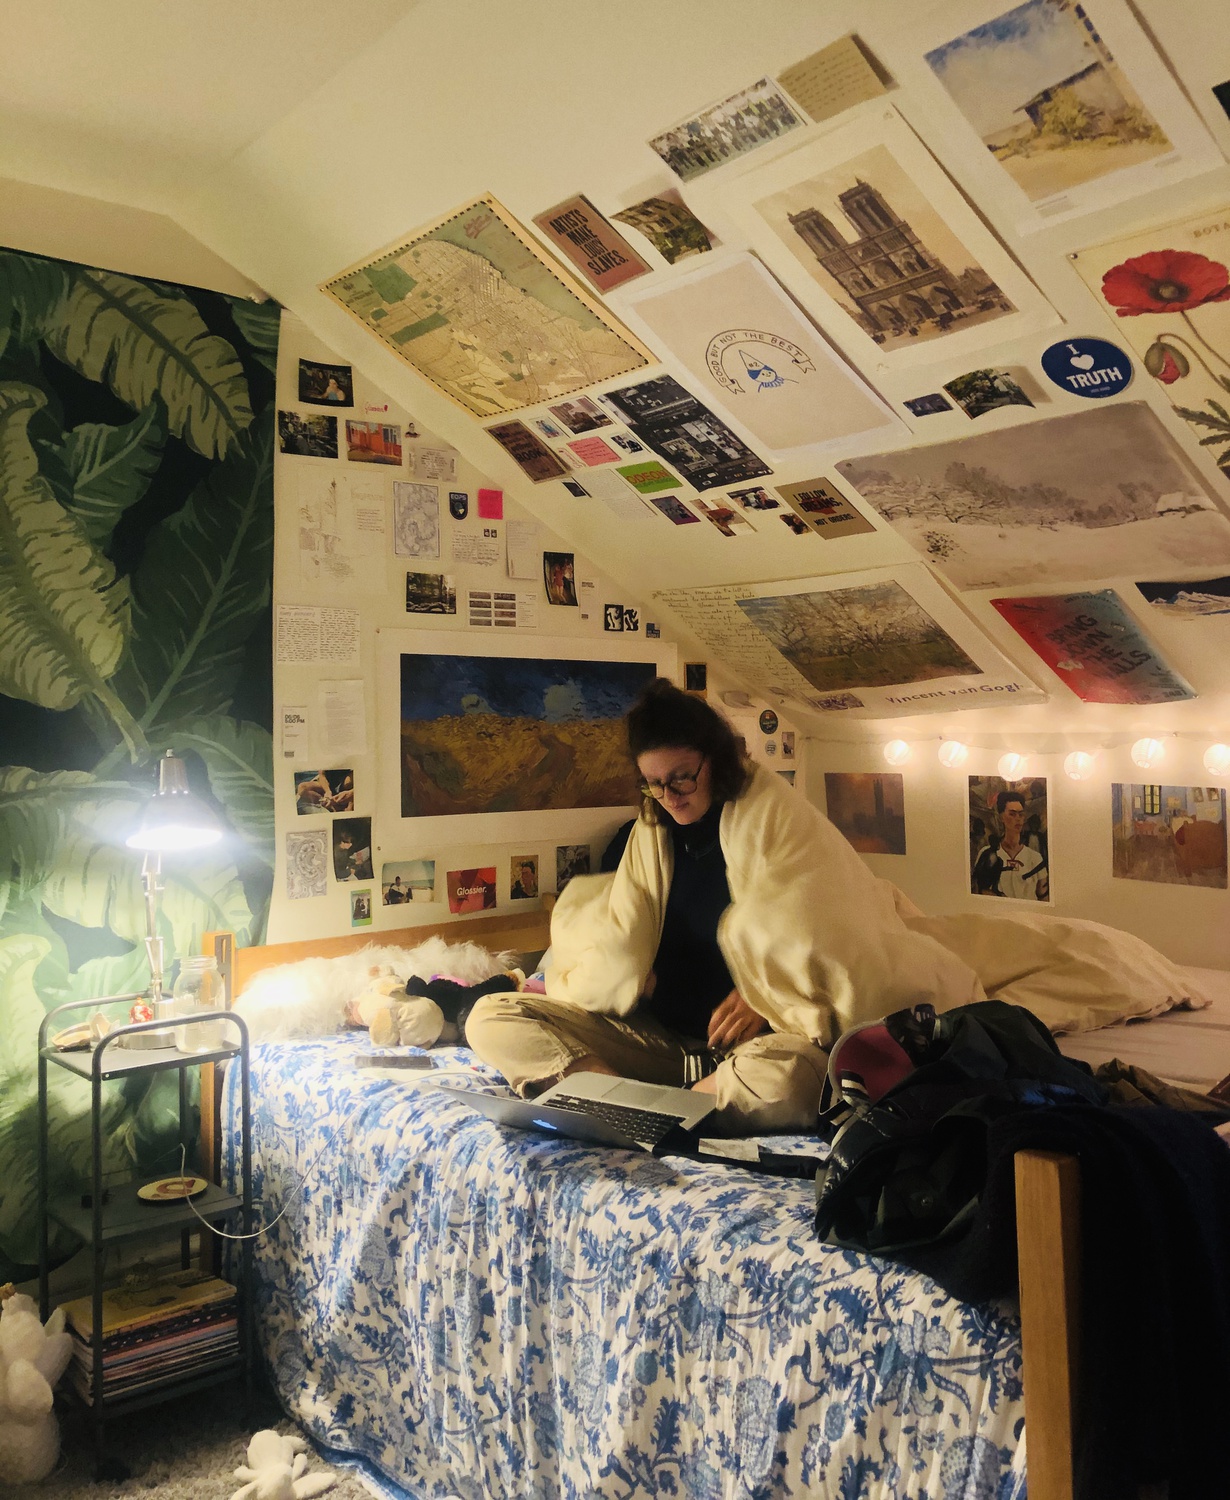 In senior year, Sam's lived with her best friend. They decorated the room by combining their ephemera collections, and the room reached its peak as a vibrantly cozy haven.